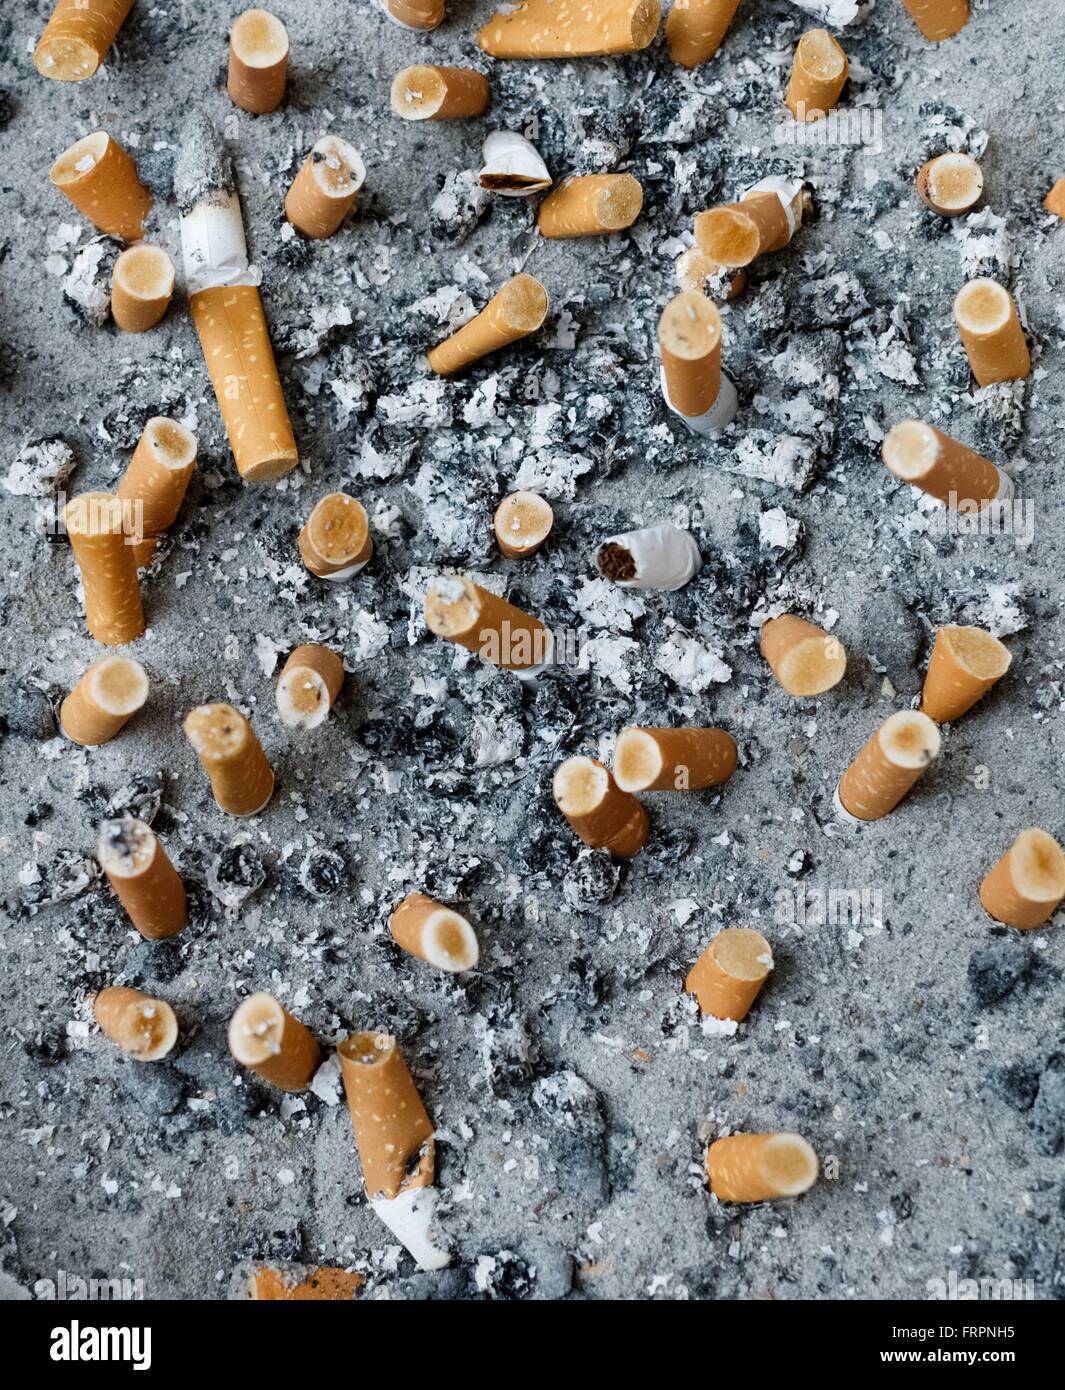 Cigarette butts in an ashtray Stock Photo